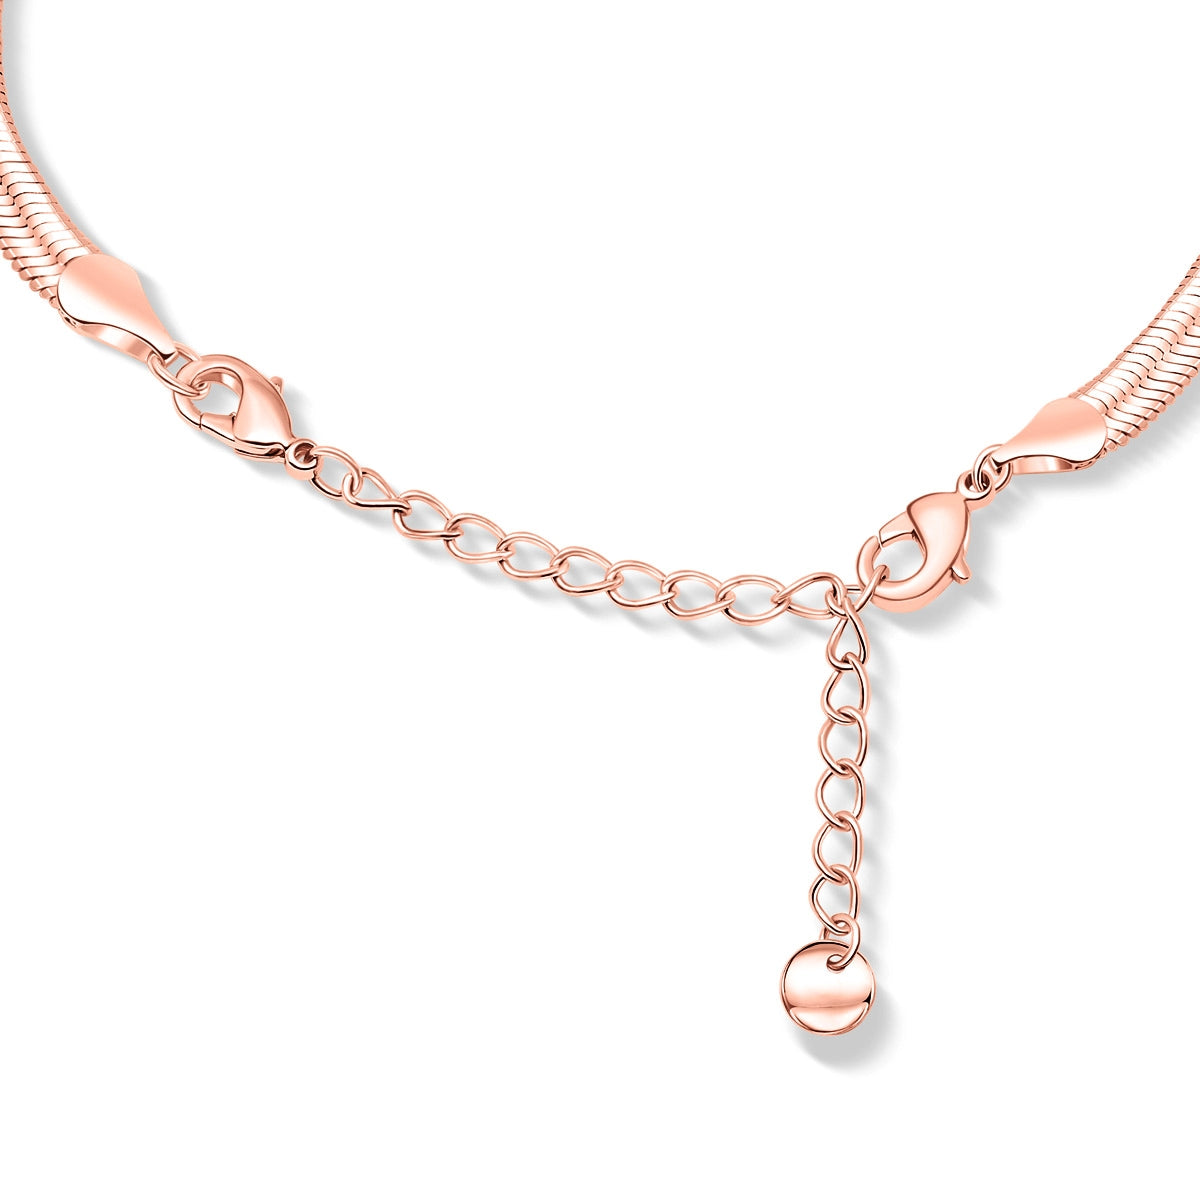 Rose gold necklace extender clasp